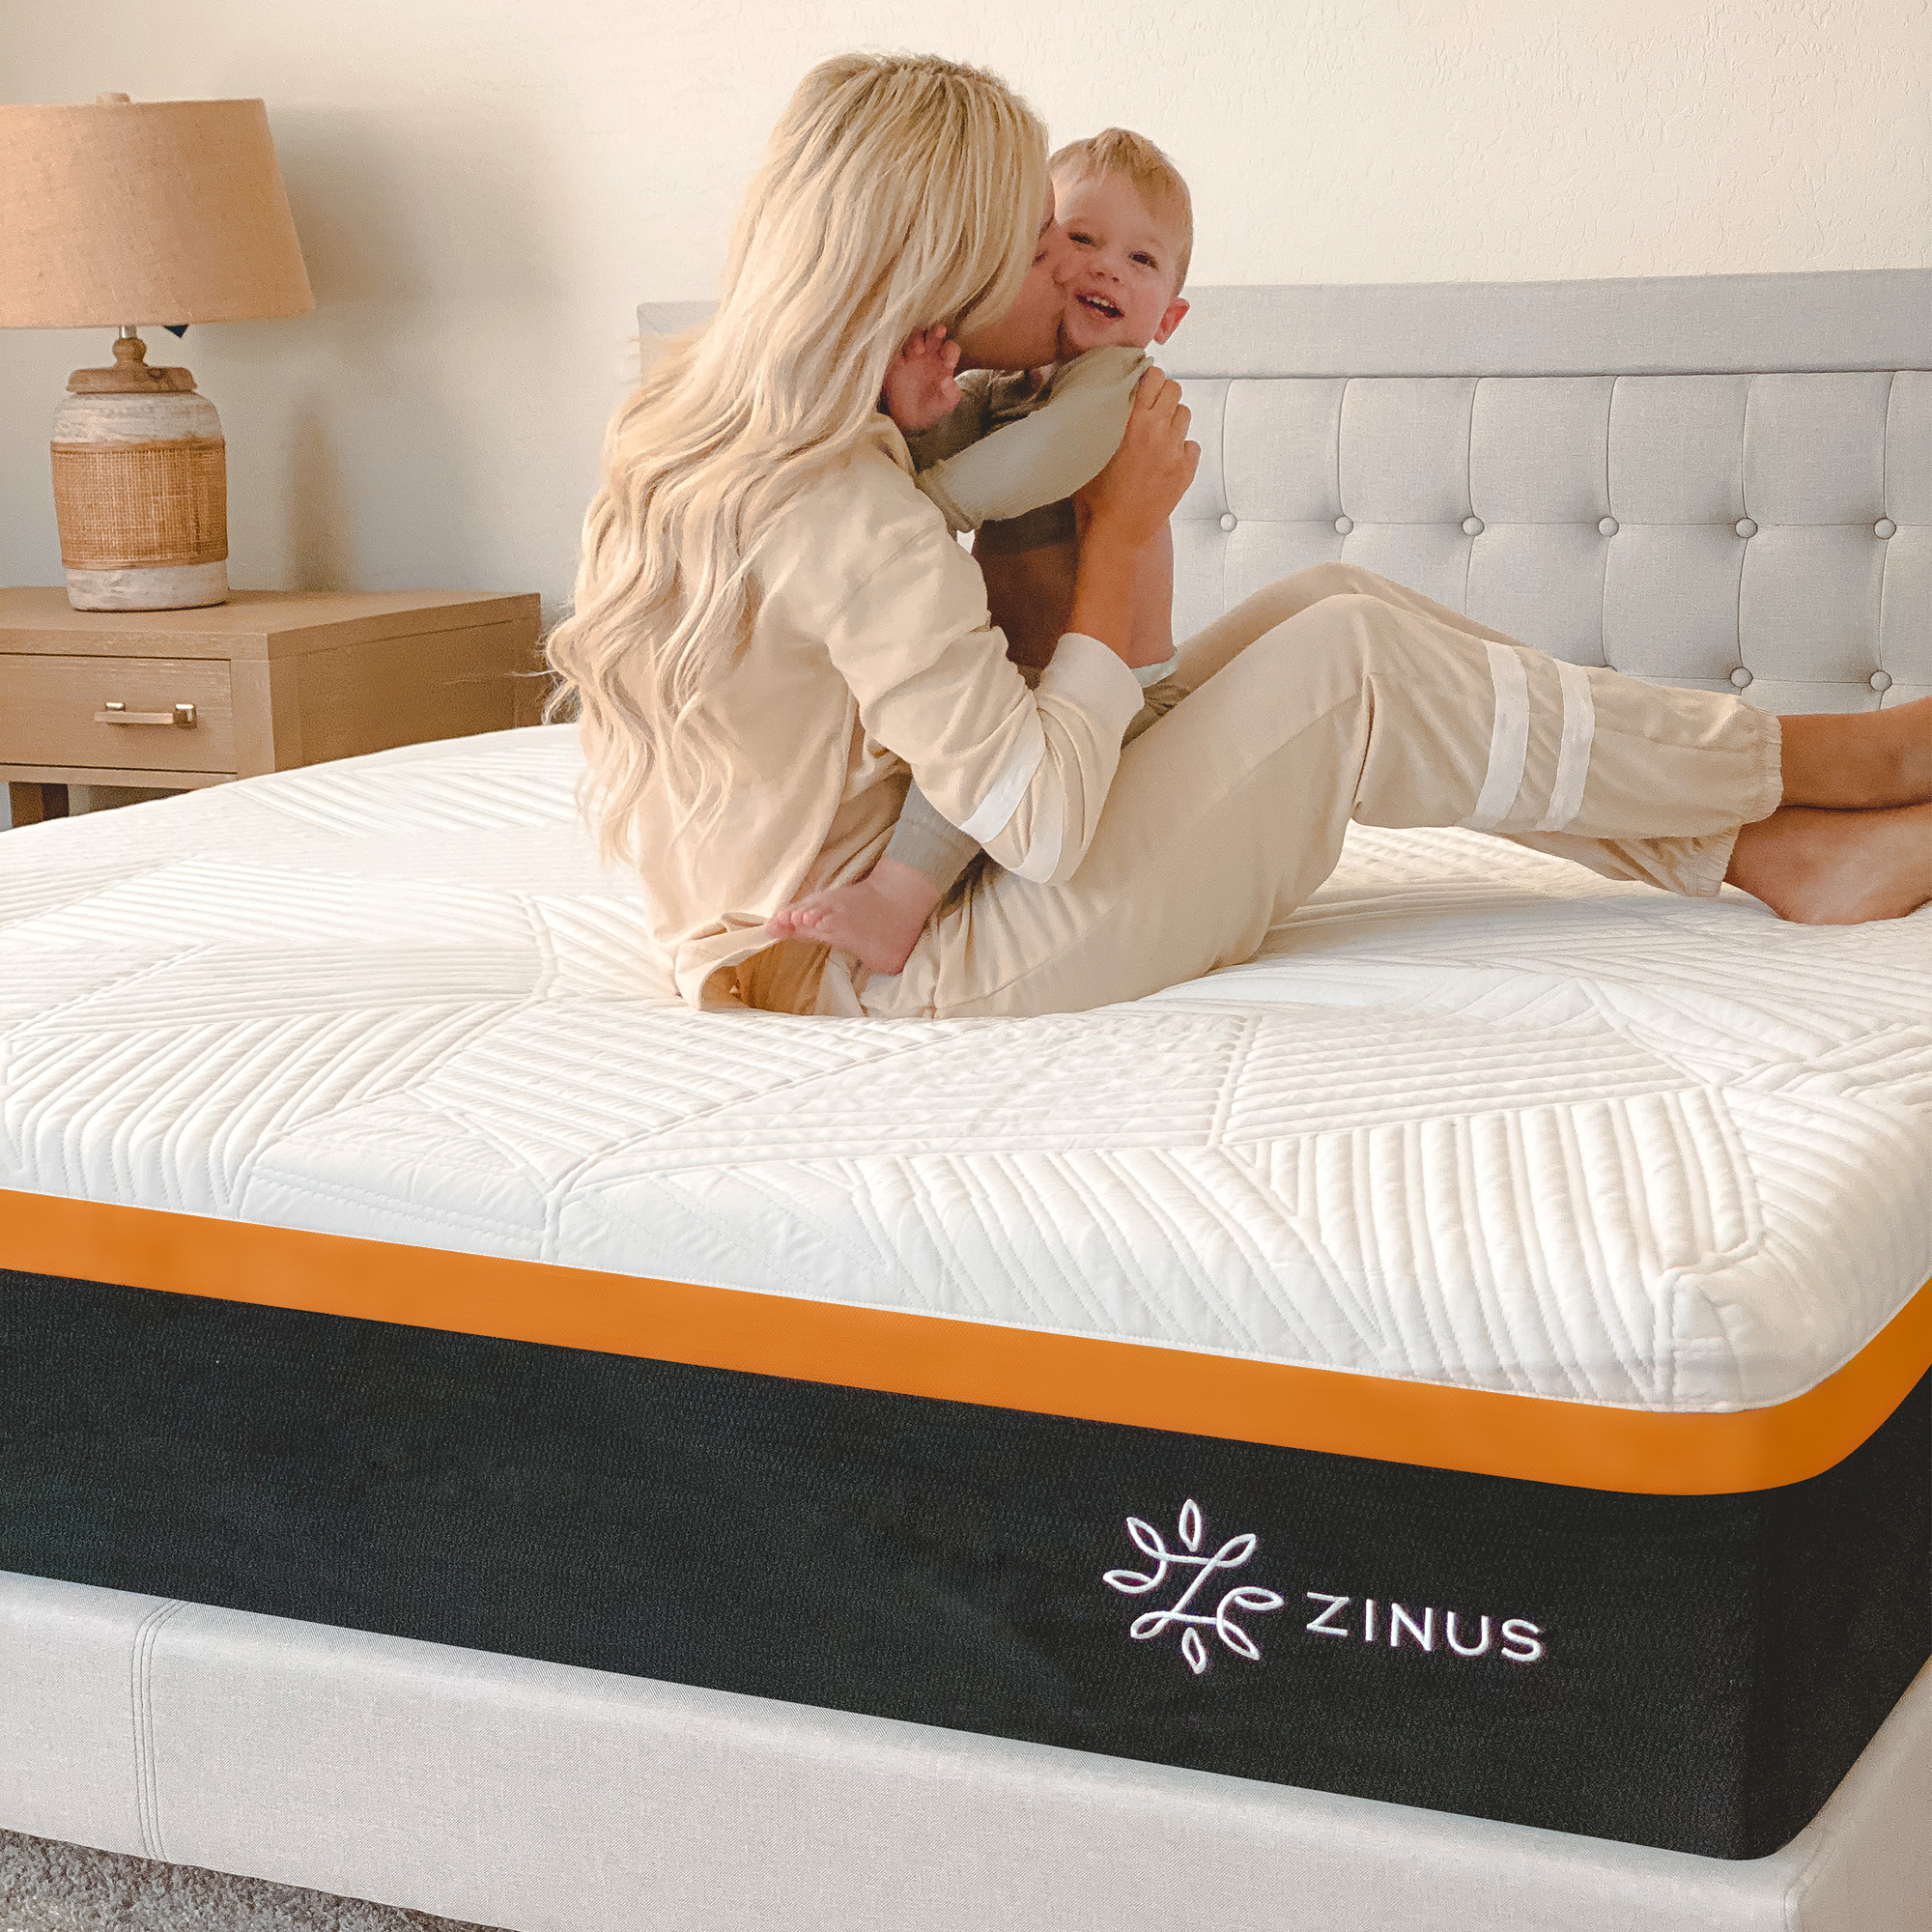 Zinus Cooling Copper ADAPTIVE® 12" Copper Memory Foam Pocket Spring Hybrid Mattress, Queen - image 2 of 10